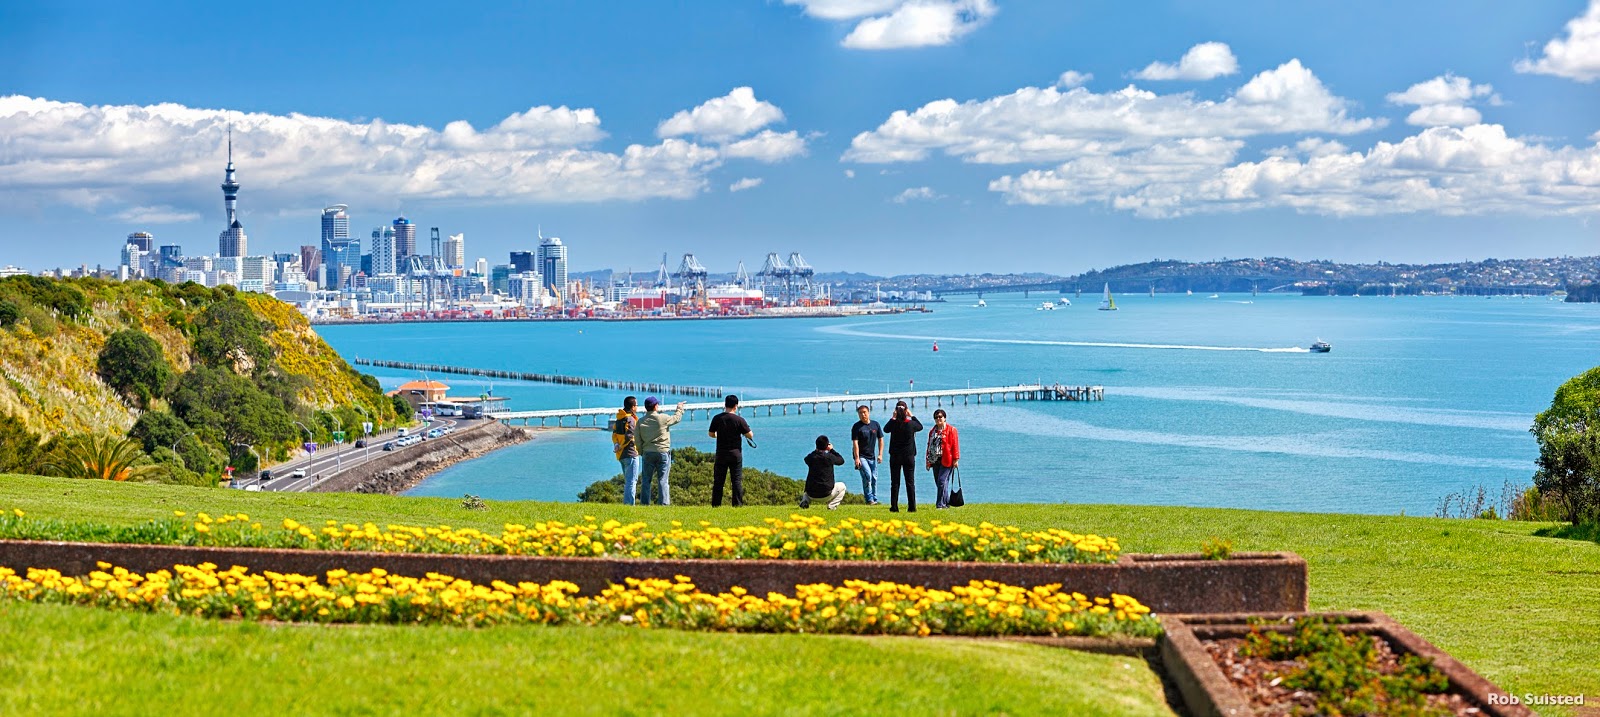 New Zealand Tourism Guide: Top 5 places to visit in Auckland